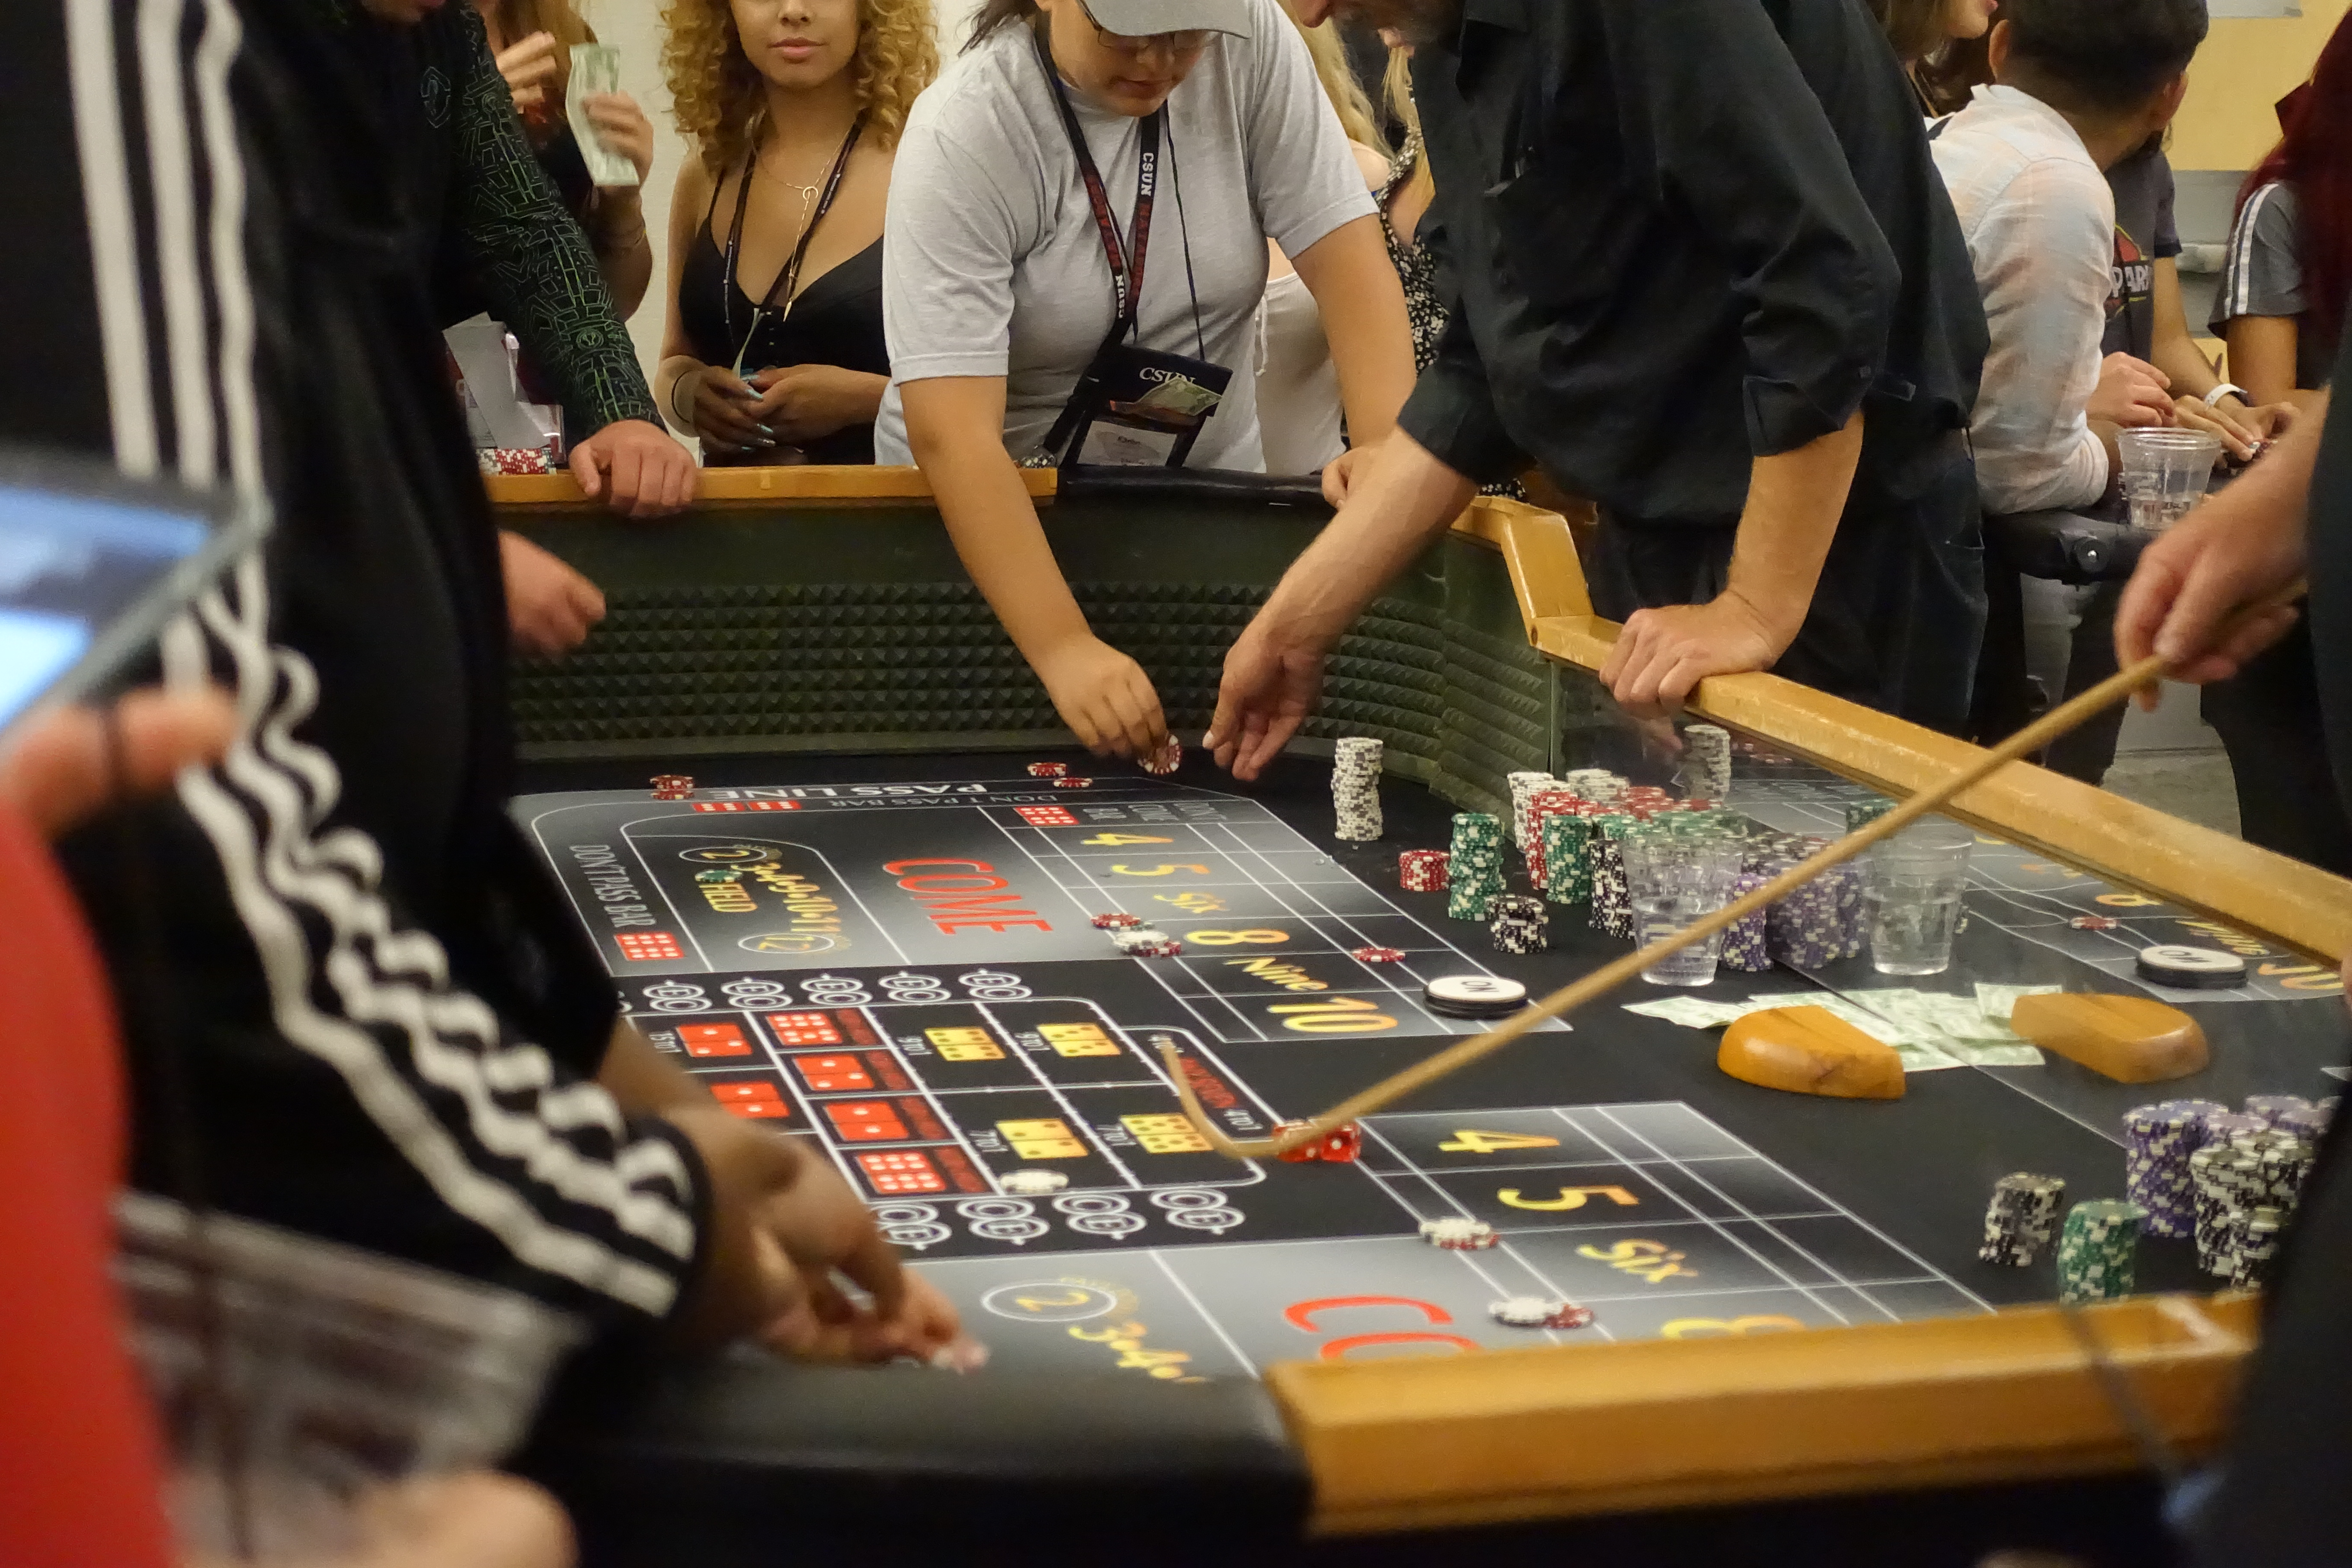 A full craps table at a casino-themed event